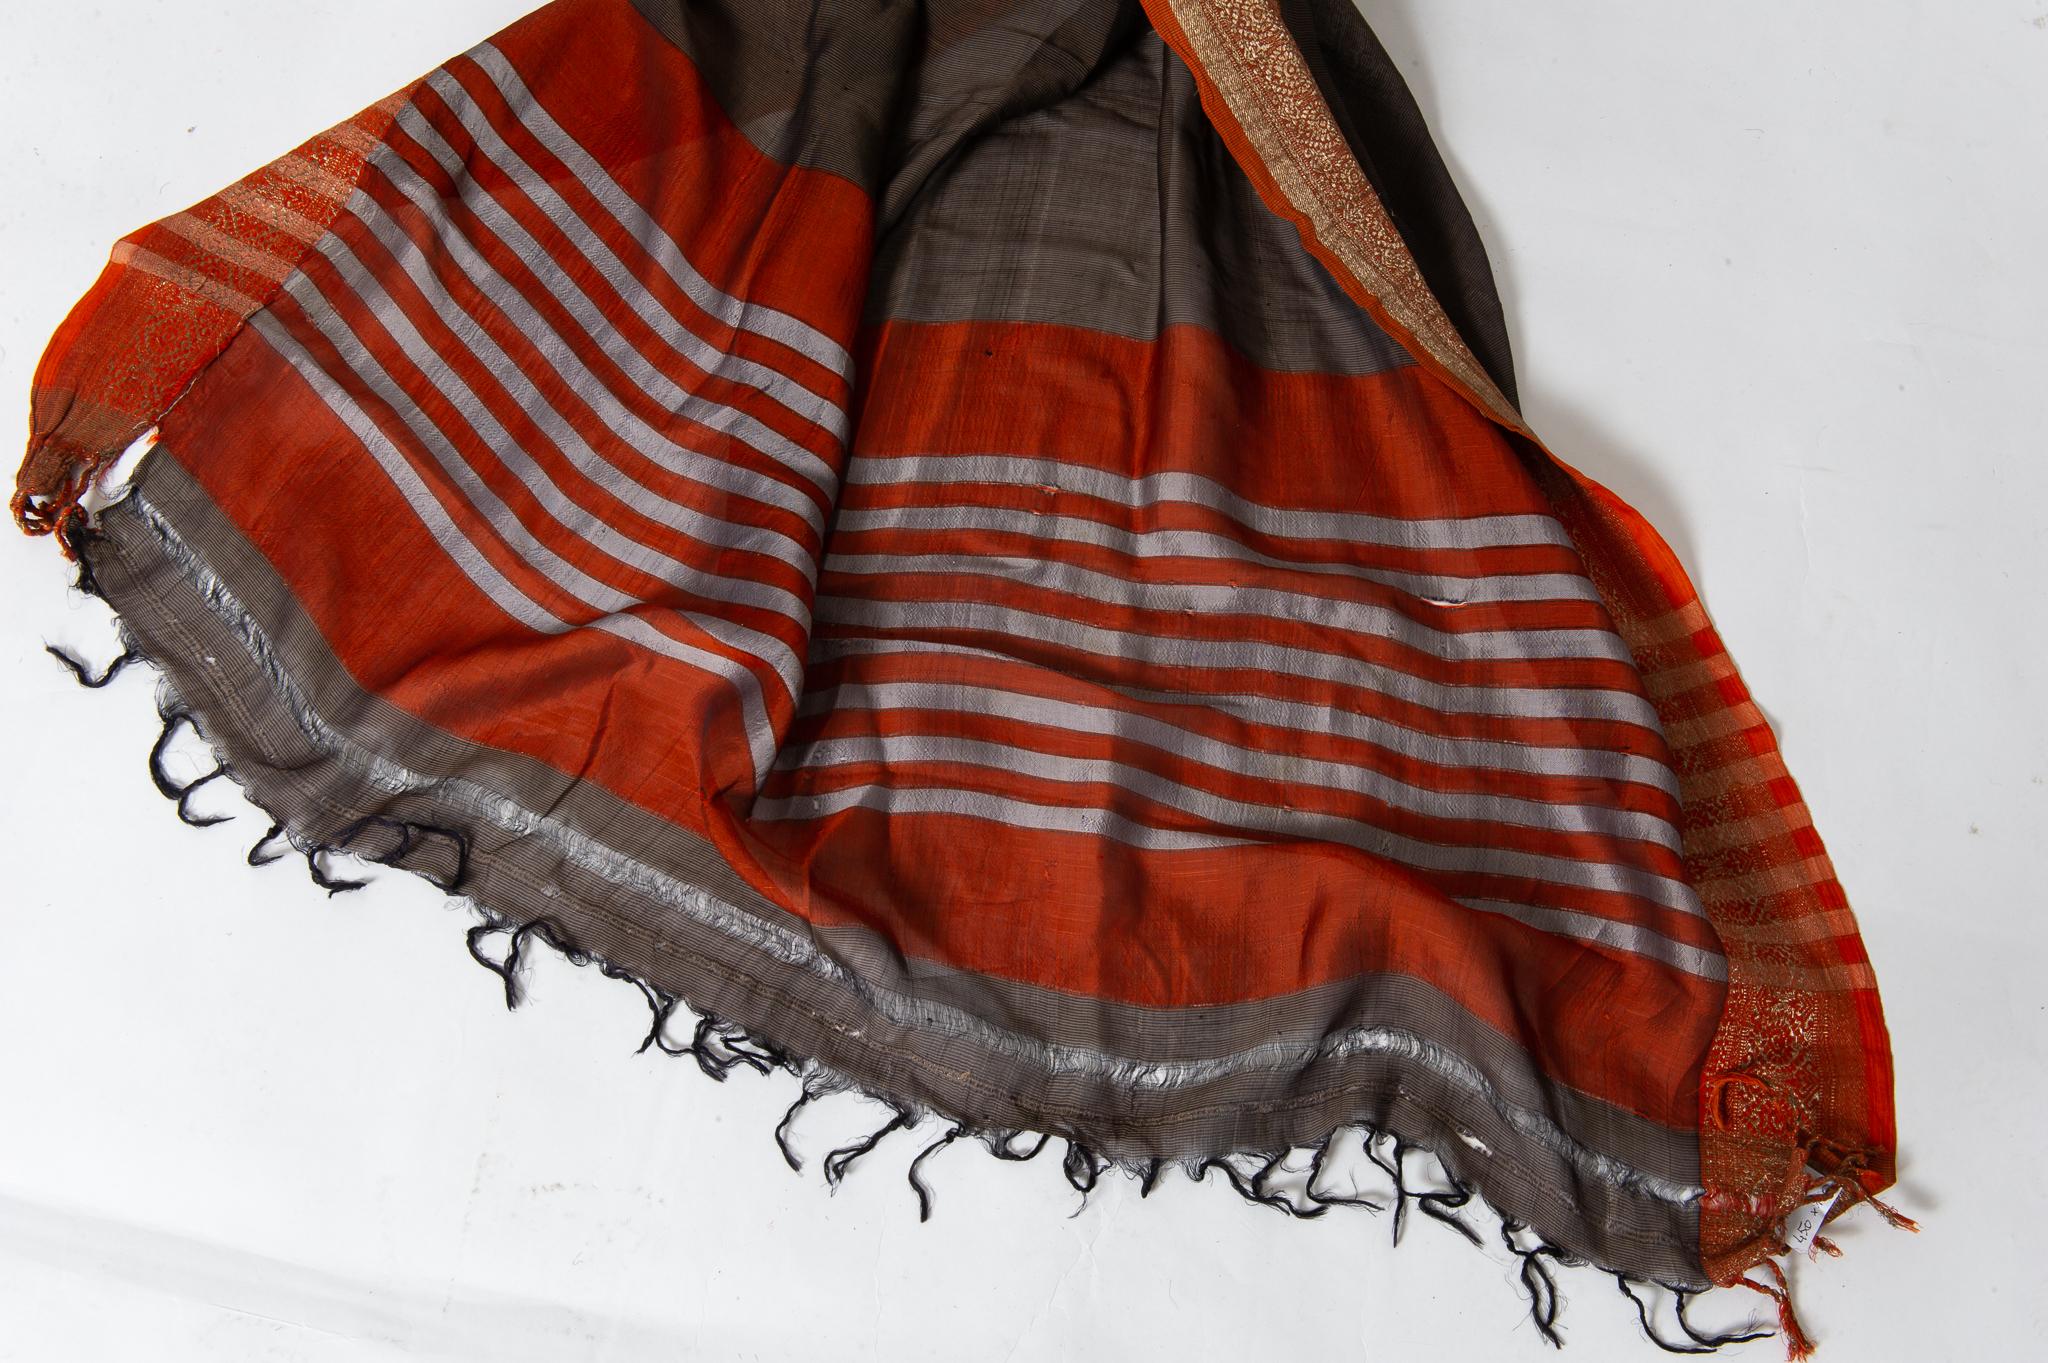 Synthetic  Indian Sari Brown Color, Brik Red and Gold Border, also Evening Summer Dress For Sale